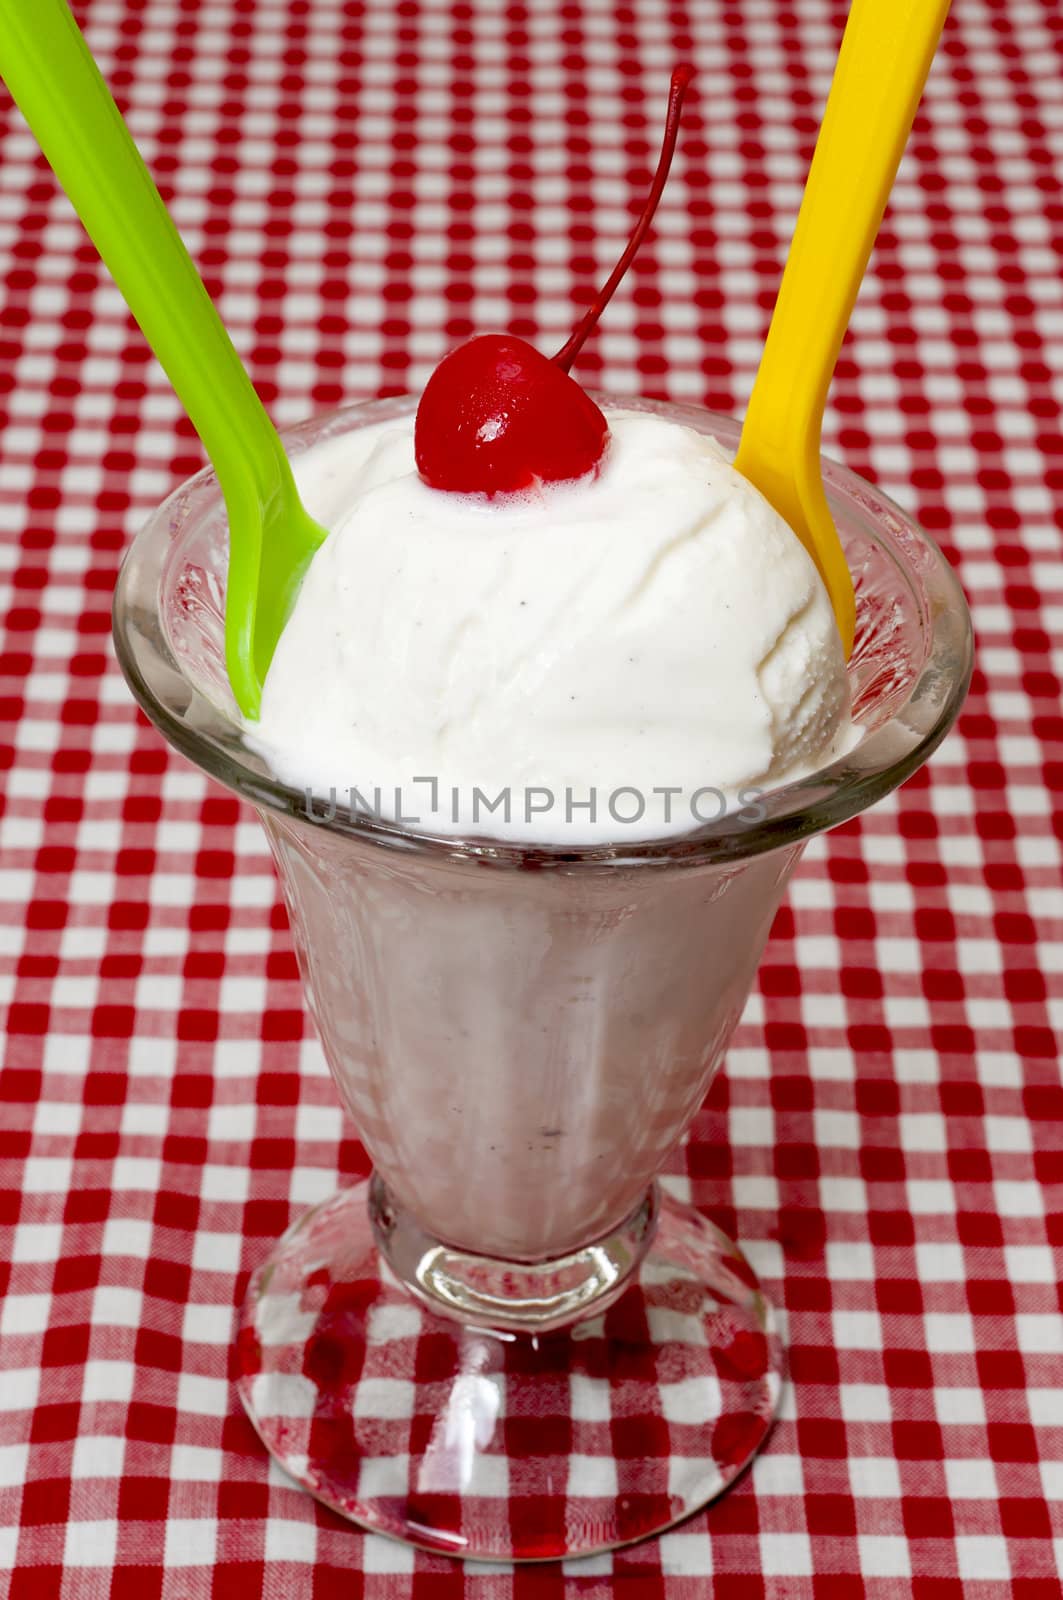 Vanilla ice cream and spoons with cherry topping on table with red gingham table cloth.